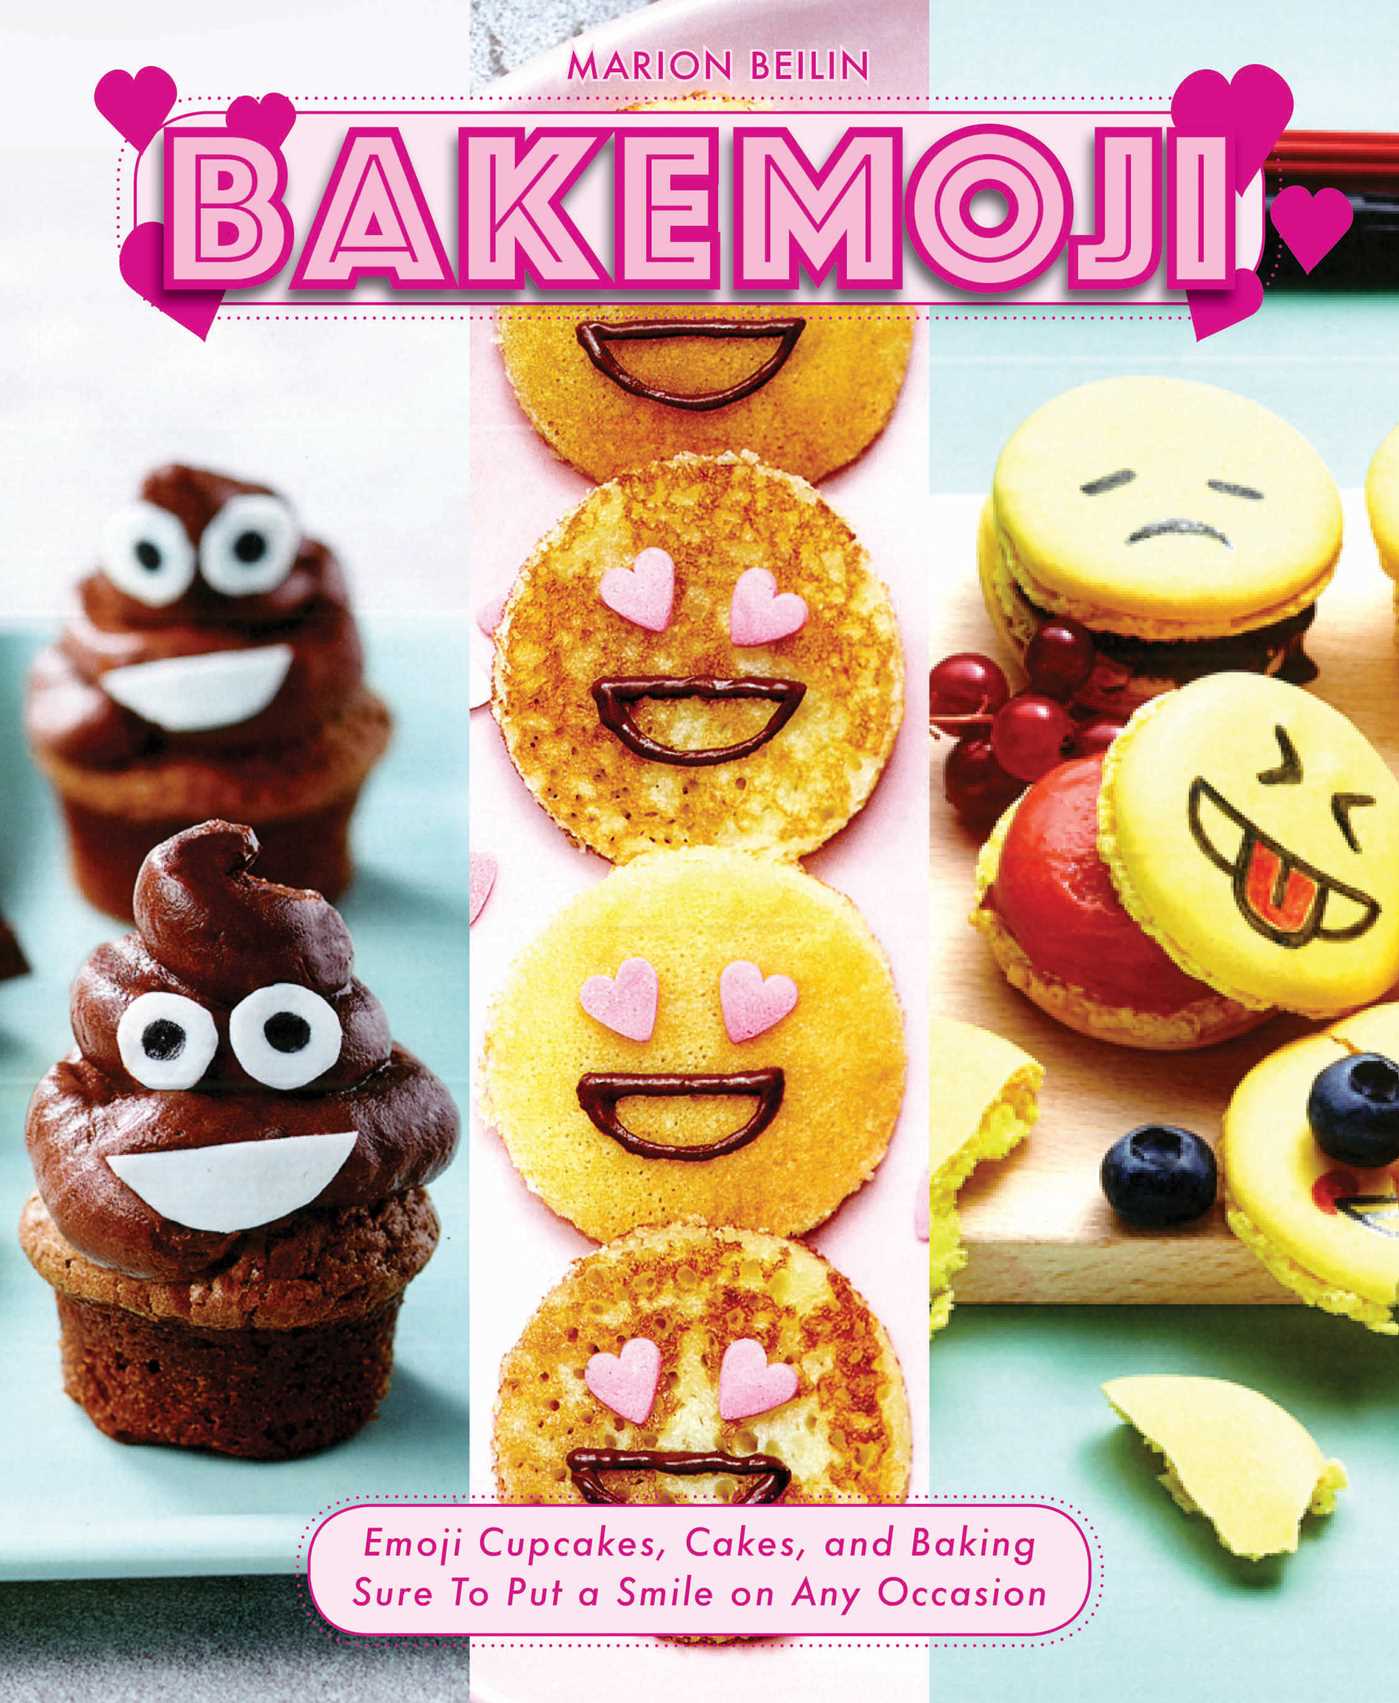 Bakemoji : Emoji Cupcakes, Cakes, and Baking Sure To Put a Smile on Any Occasion